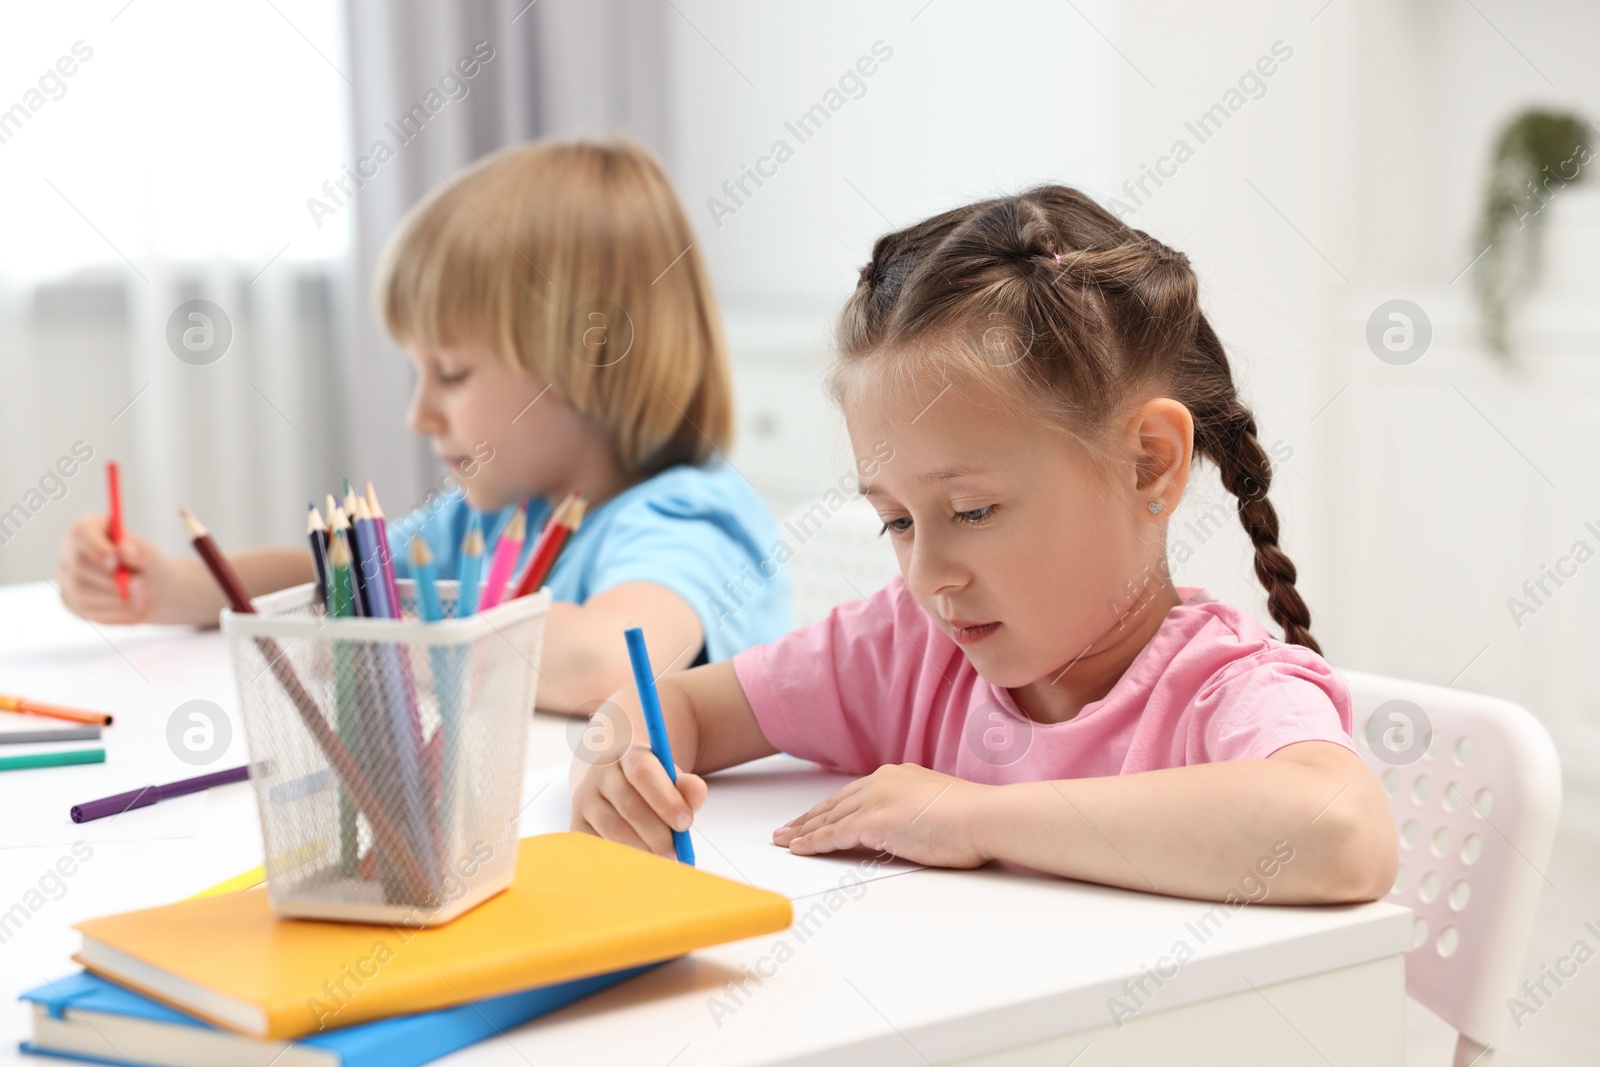 Photo of Cute little children drawing at table indoors